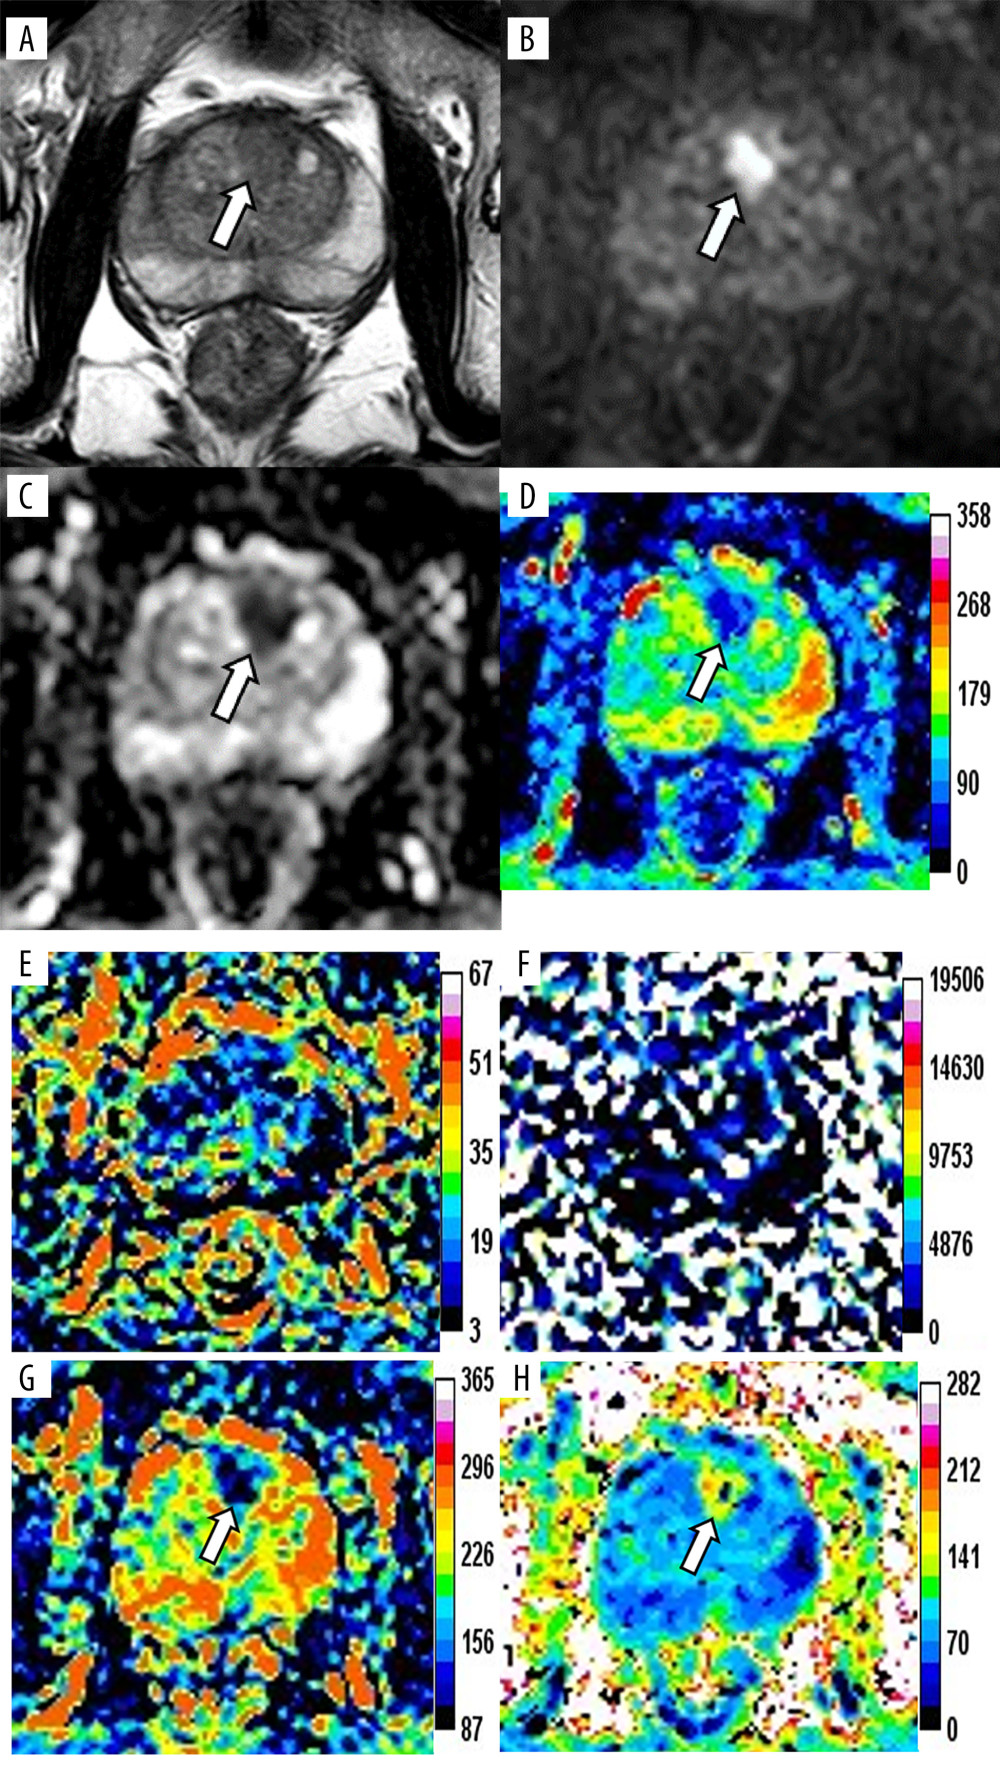 Magnetic resonance images of a 76-year-old patient with prostate cancer (PCa), total prostate-specific antigen (PSA) of 23.48 ng/mL, free/total PSA of 0.145, and PSA density of 0.34 ng/mL/cm3. The axis T2-weighted imaging (A) shows a low-signal area at the anterior of the transitional zone (white arrow). The lesion appears as a significantly high signal change on diffusion-weighted imaging (B, white arrow), whereas it appears as a low signal on apparent diffusion coefficient (ADC) (C, white arrow). The pseudo-color maps of D (D), Dapp (G), and Kapp (H) show the lesion clearly (white arrow). The image quality of f (E) and D* (F) are unsatisfactory. The parameter values of the lesion are 0.66×10−3 mm2/s (ADC), 0.64×10−3 mm2/s (D), 0.12 (f), 90.59×10−3 mm2/s (D*), 0.94×10−3 mm2/s (Dapp), and 1.19 (Kapp). The prediction probability (P) of the lesion being cancer can be calculated as follows:P=e(4.339+3.896×0.340-7.130×0.660)1+e(4.339+3.896×0.340-7.130×0.660)=72.2%. (Ingenia 3.0T,PHILIPS;PRIDE DWI Tool 1.5,PHILIPS;Image J 1.52a,NIH).